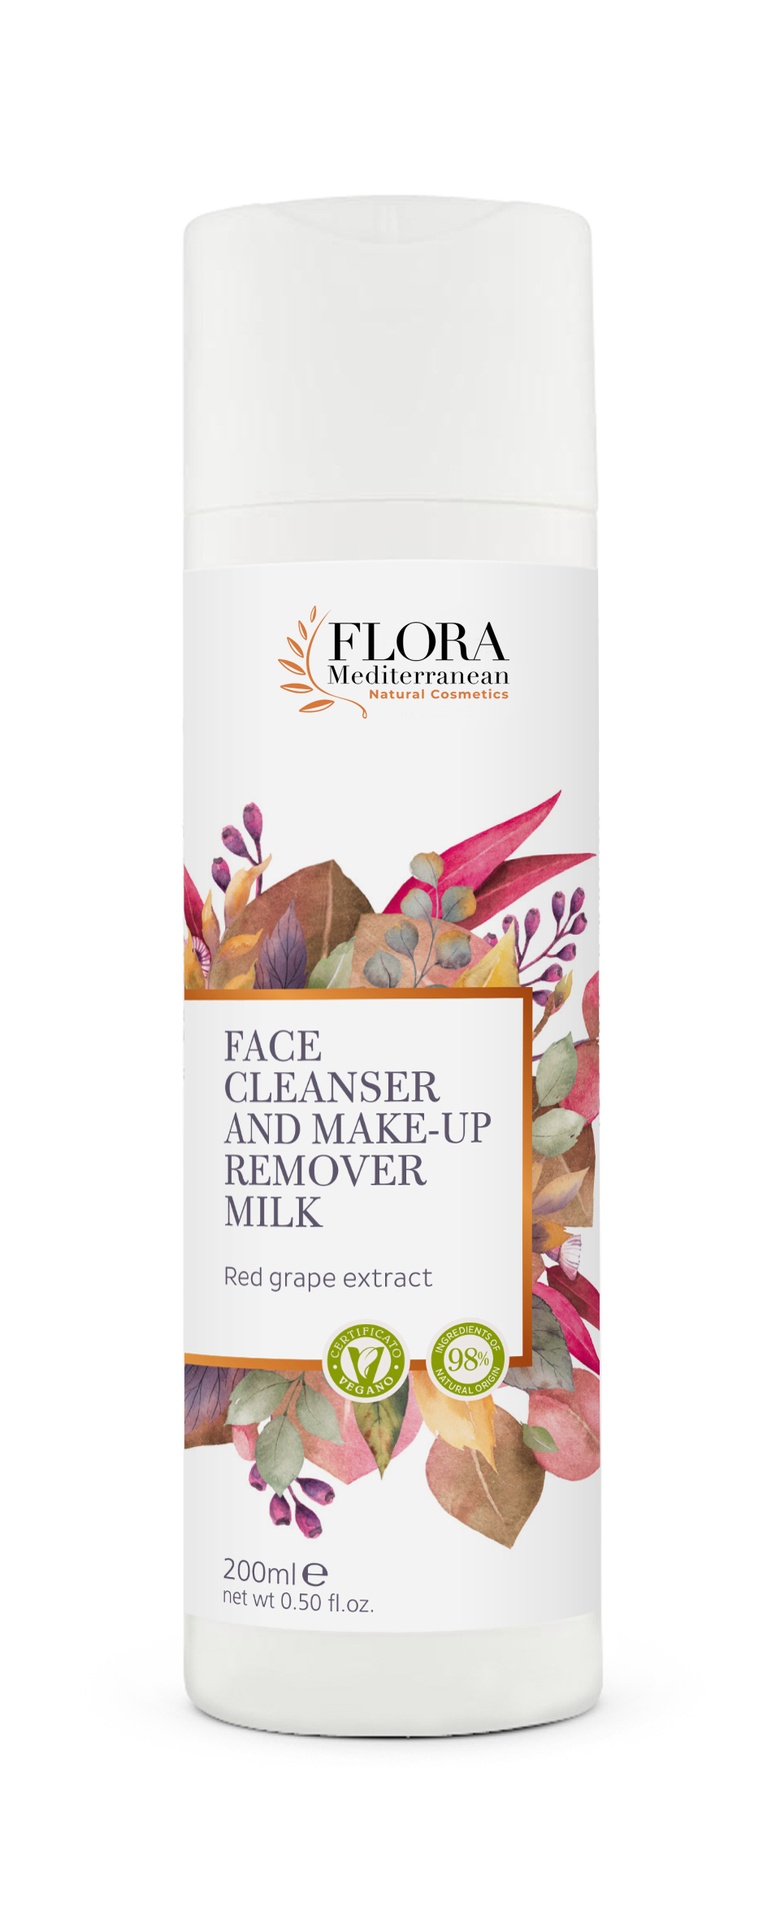 Face cleanser and make-up remover milk with red grape extract 200 ml